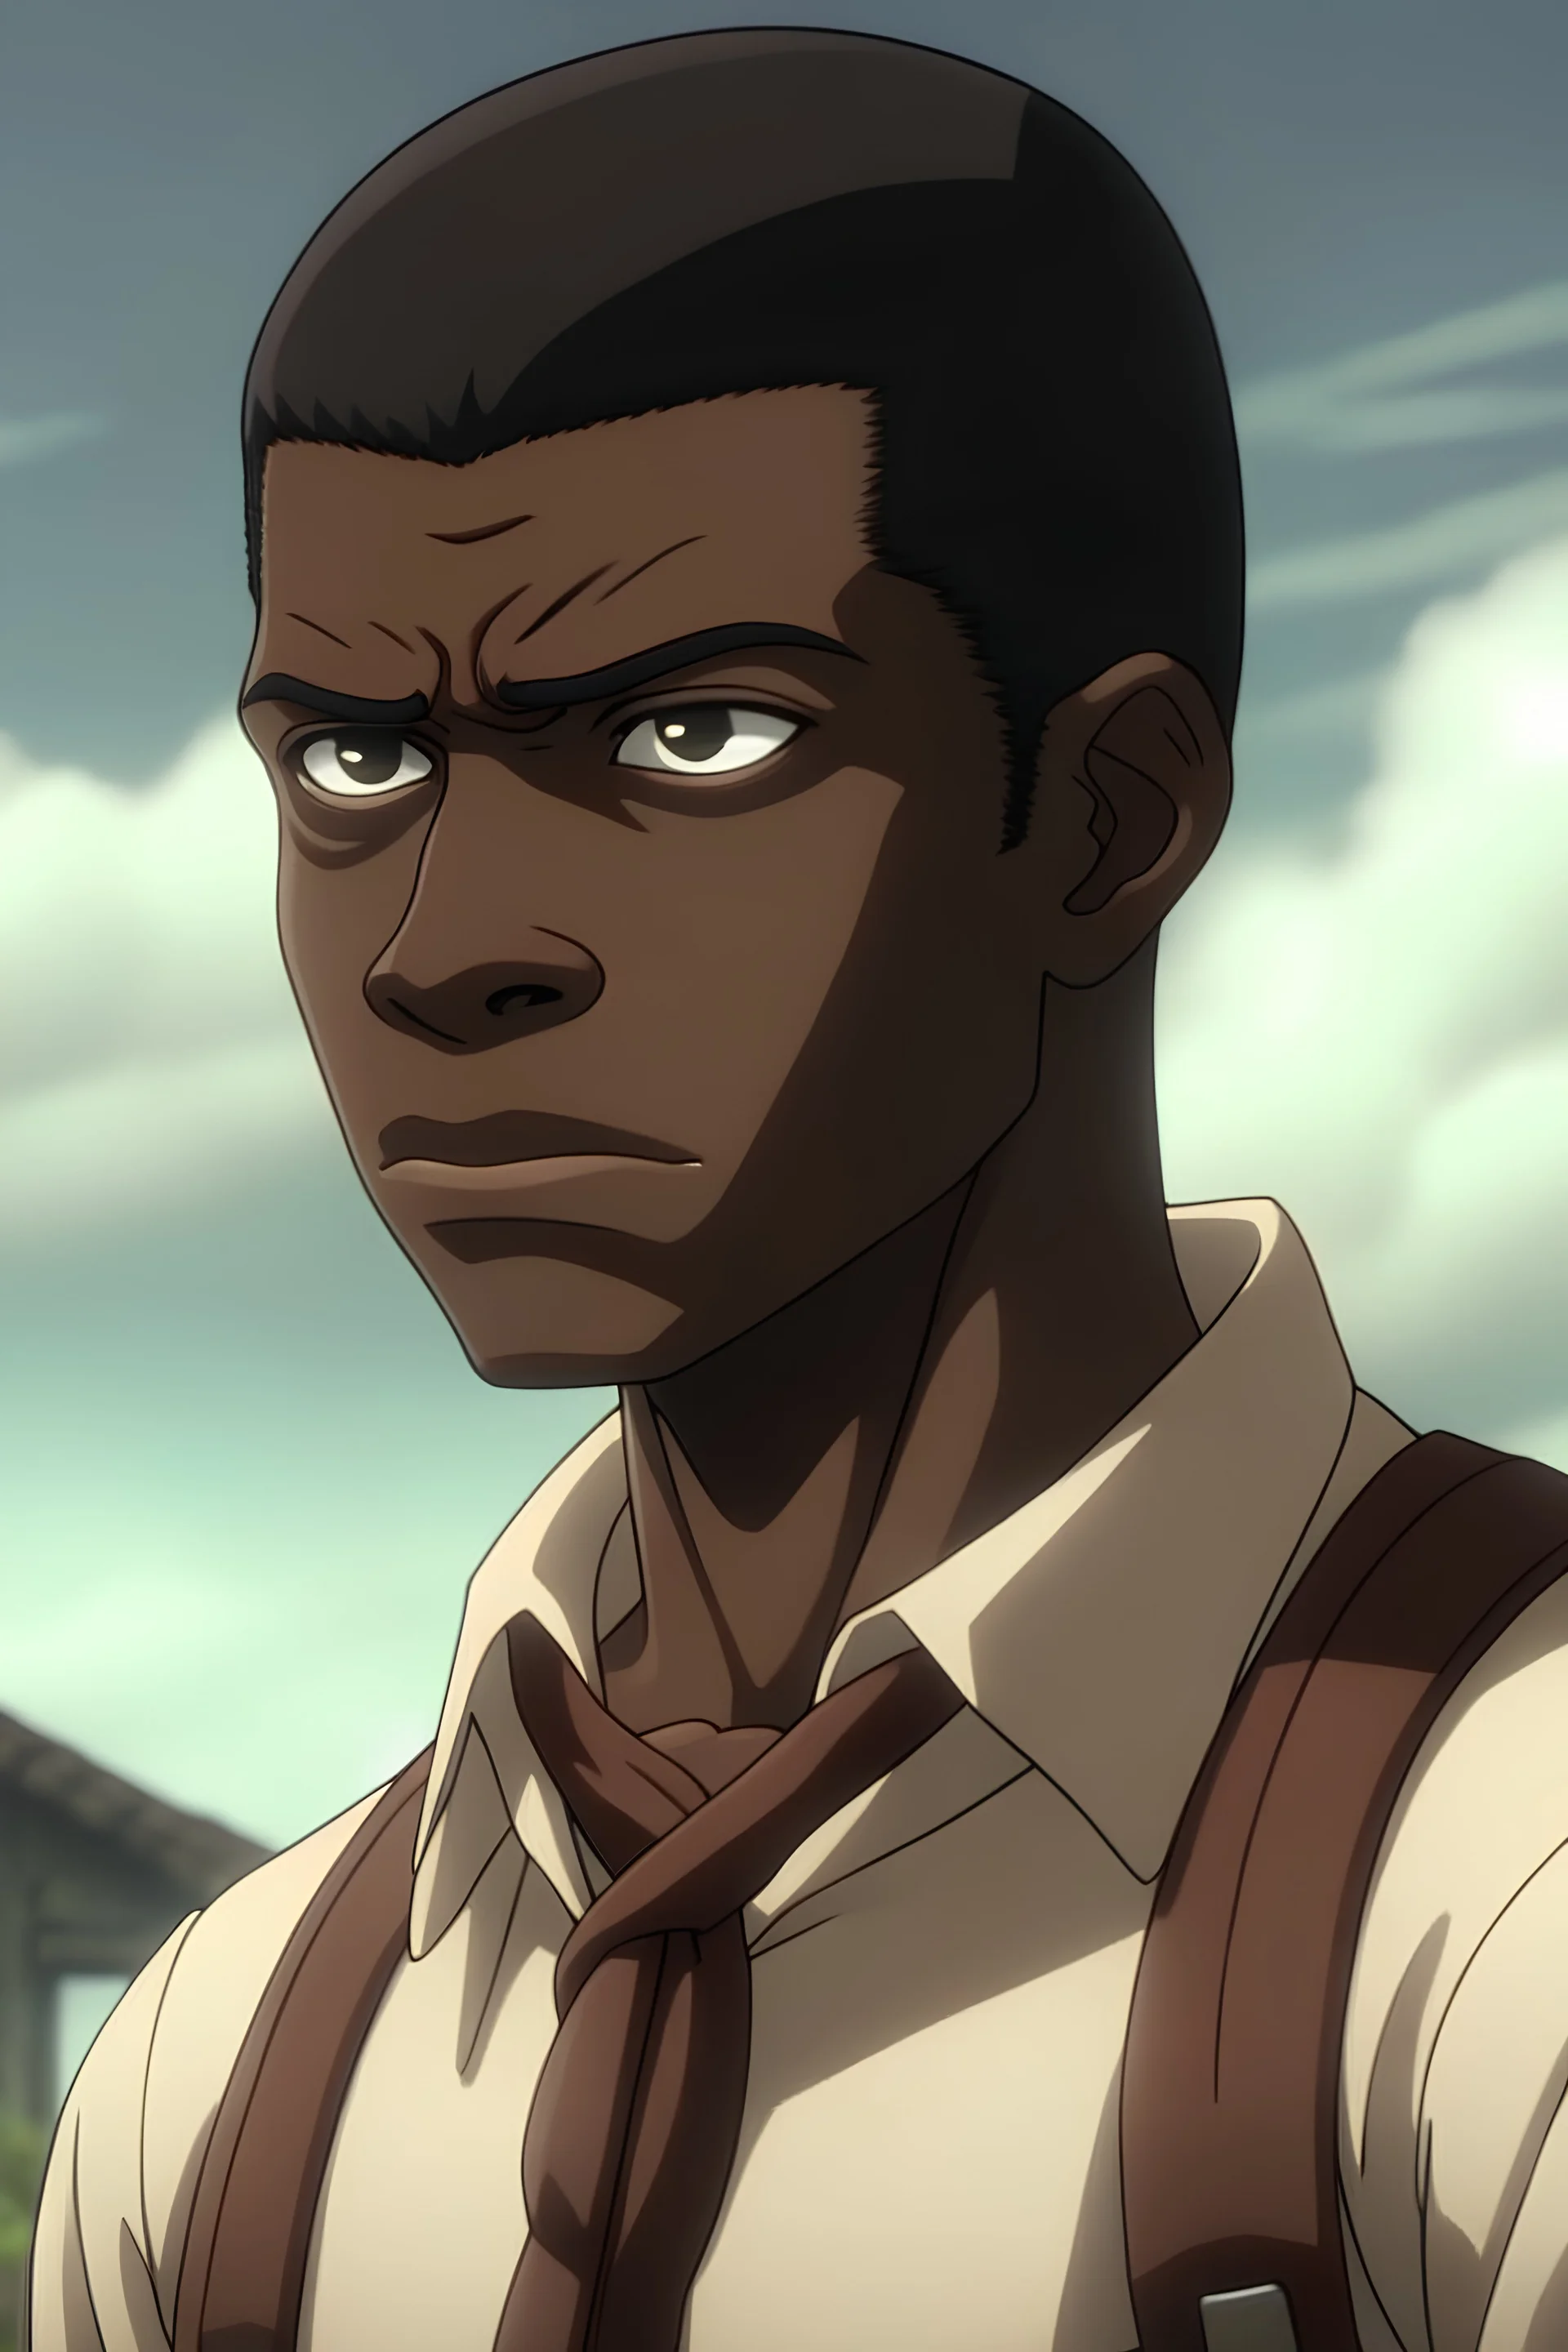 Attack on Titan screencap of a african male with small body, short, Black straight short hair skin tone is black, eye color is black , face shape is armin-like face, Scenery is (beautiful, intense, warm, nighttime, etc.). He is wearing a (outfit of choice). (WIT/MAPPA) Studios (season 1, season 2, season 3, season 4) screencap.